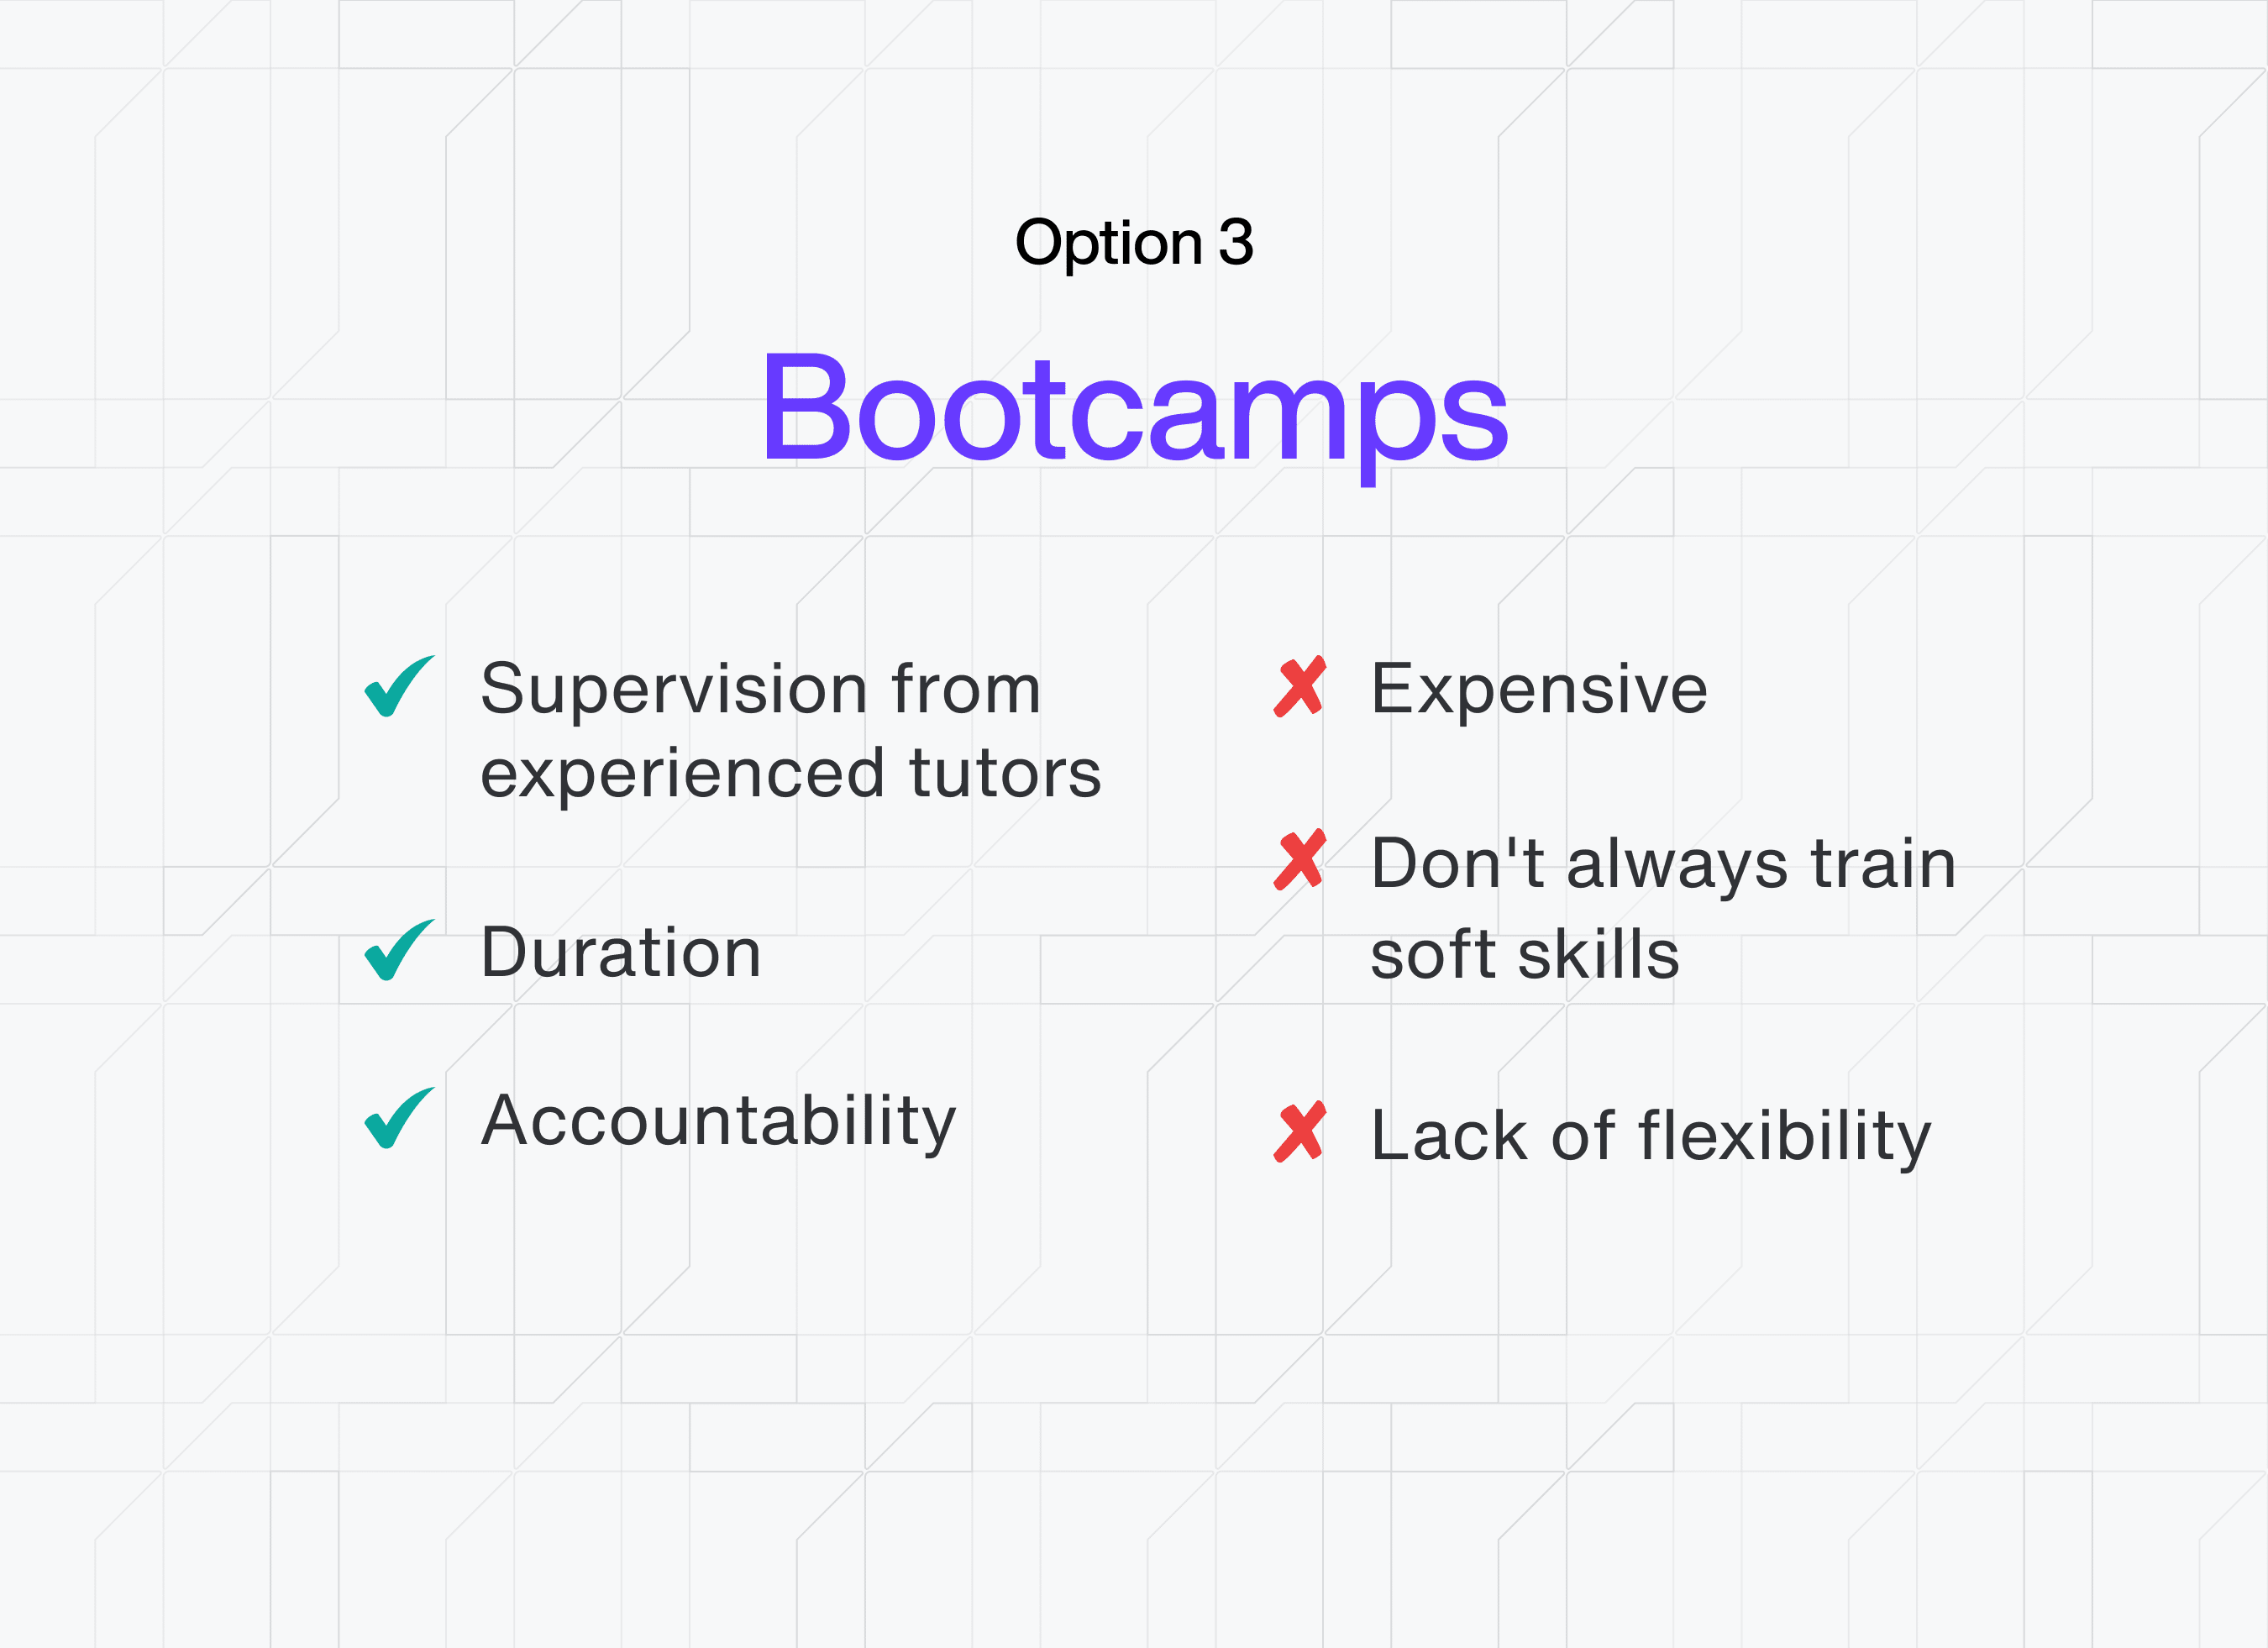 Bootcamp pros and cons